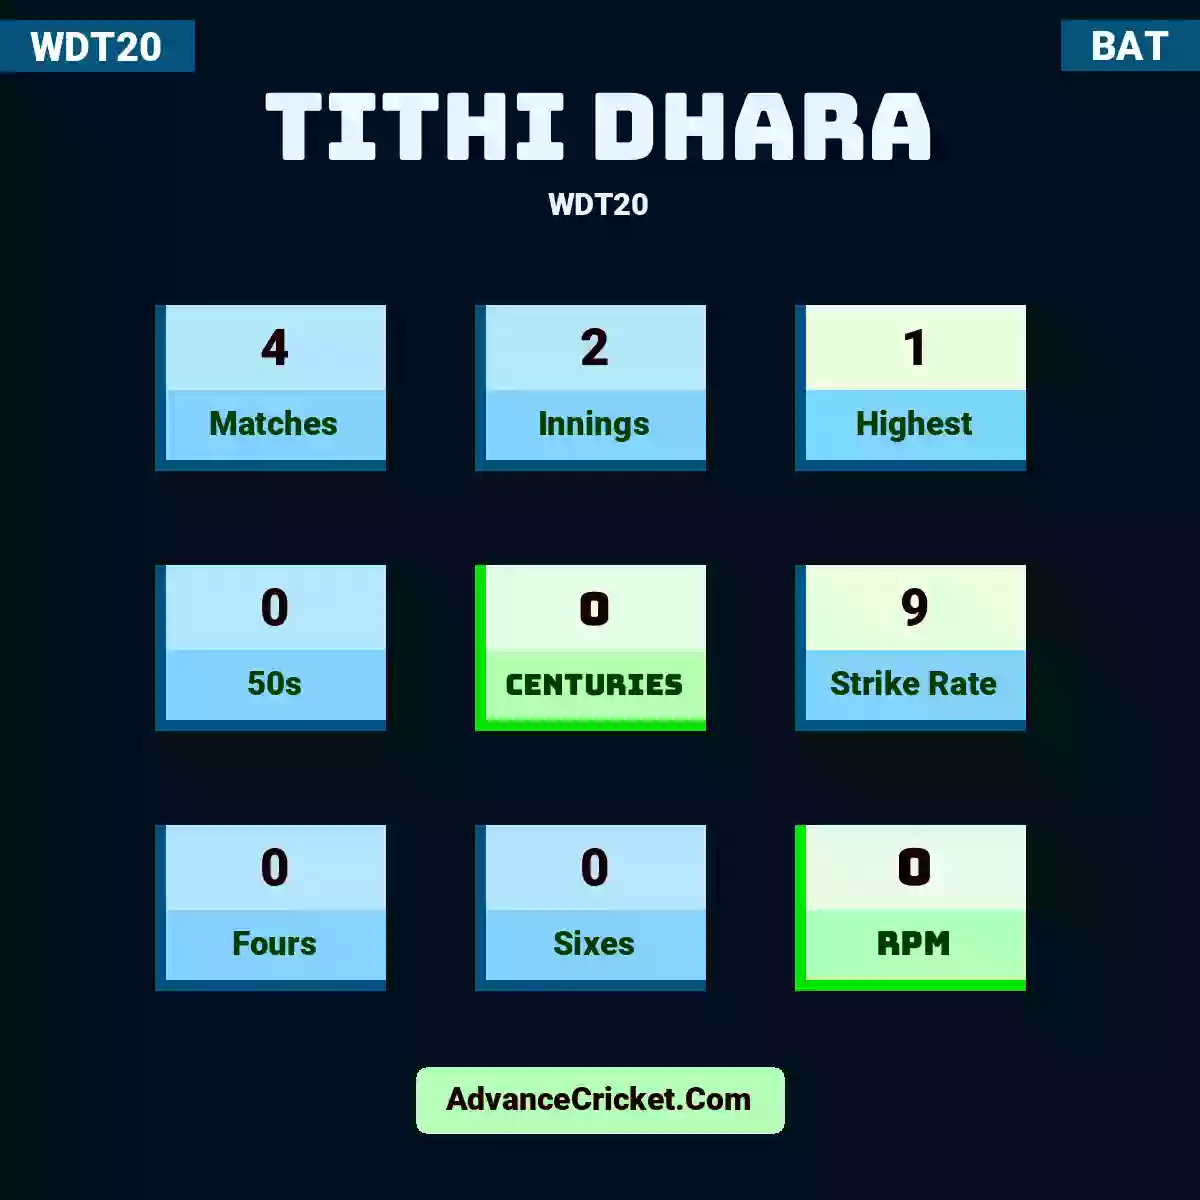 Tithi Dhara WDT20 , Tithi Dhara played 4 matches, scored 1 runs as highest, 0 half-centuries, and 0 centuries, with a strike rate of 9. T.Dhara hit 0 fours and 0 sixes, with an RPM of 0.